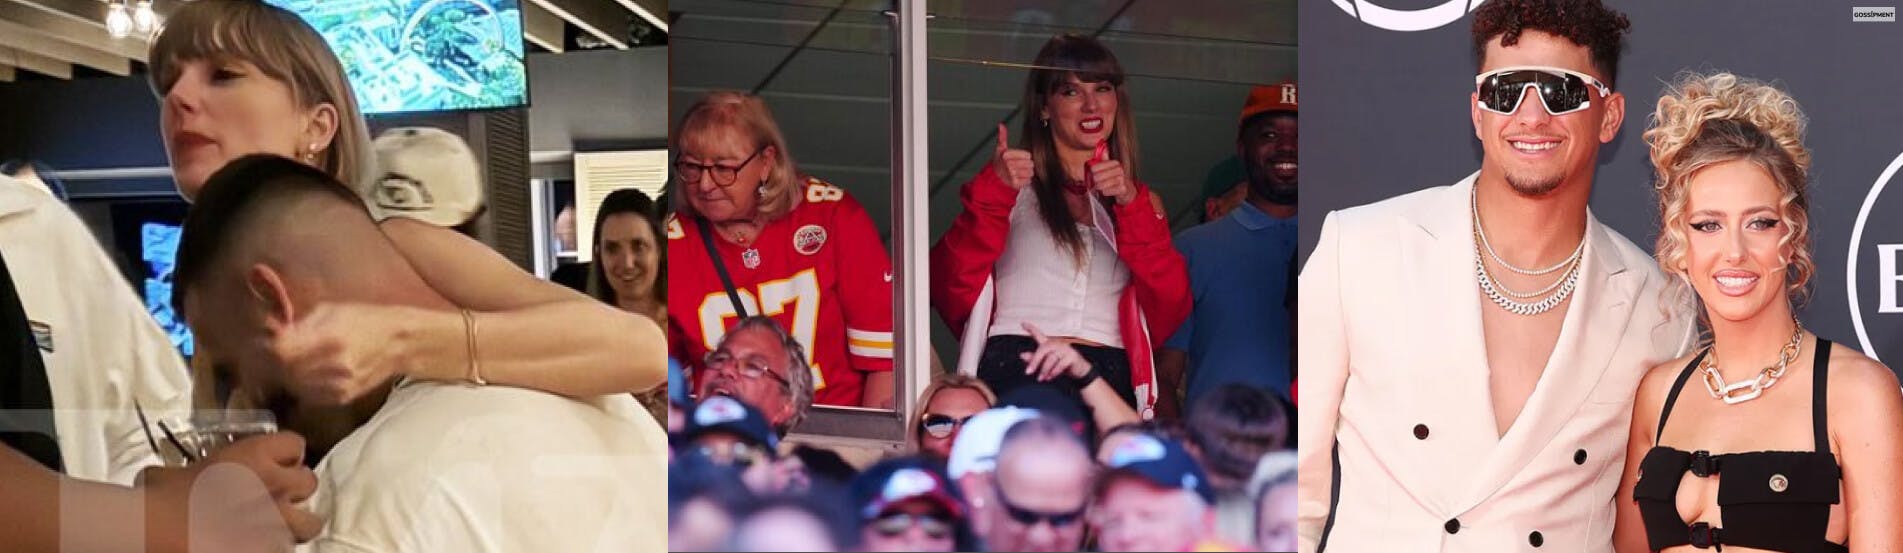 Cover Image for Taylor Swift Eases Into WAG Role With Brittany Mahomes Downing Shots At Chiefs Afterparty: Reports